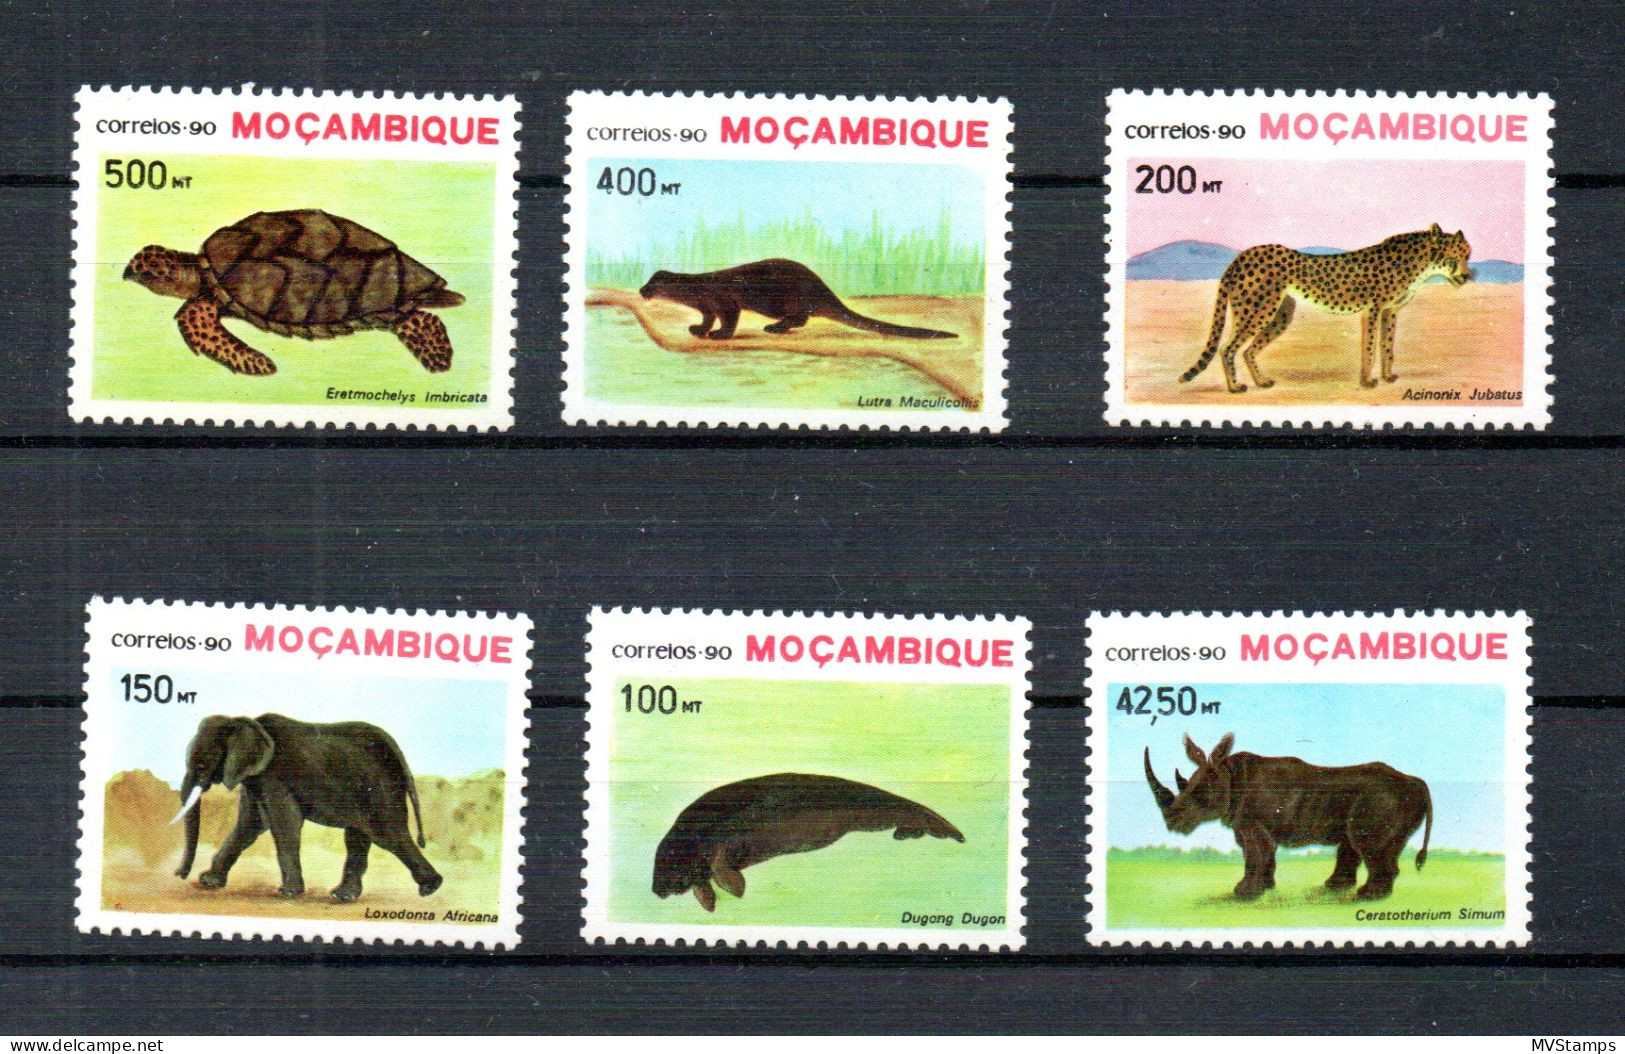 Mozambique 1990 Set Animal (Turtle/Rino/Dugong) Stamps (Michel 1209/14) Nice MNH - Mozambique